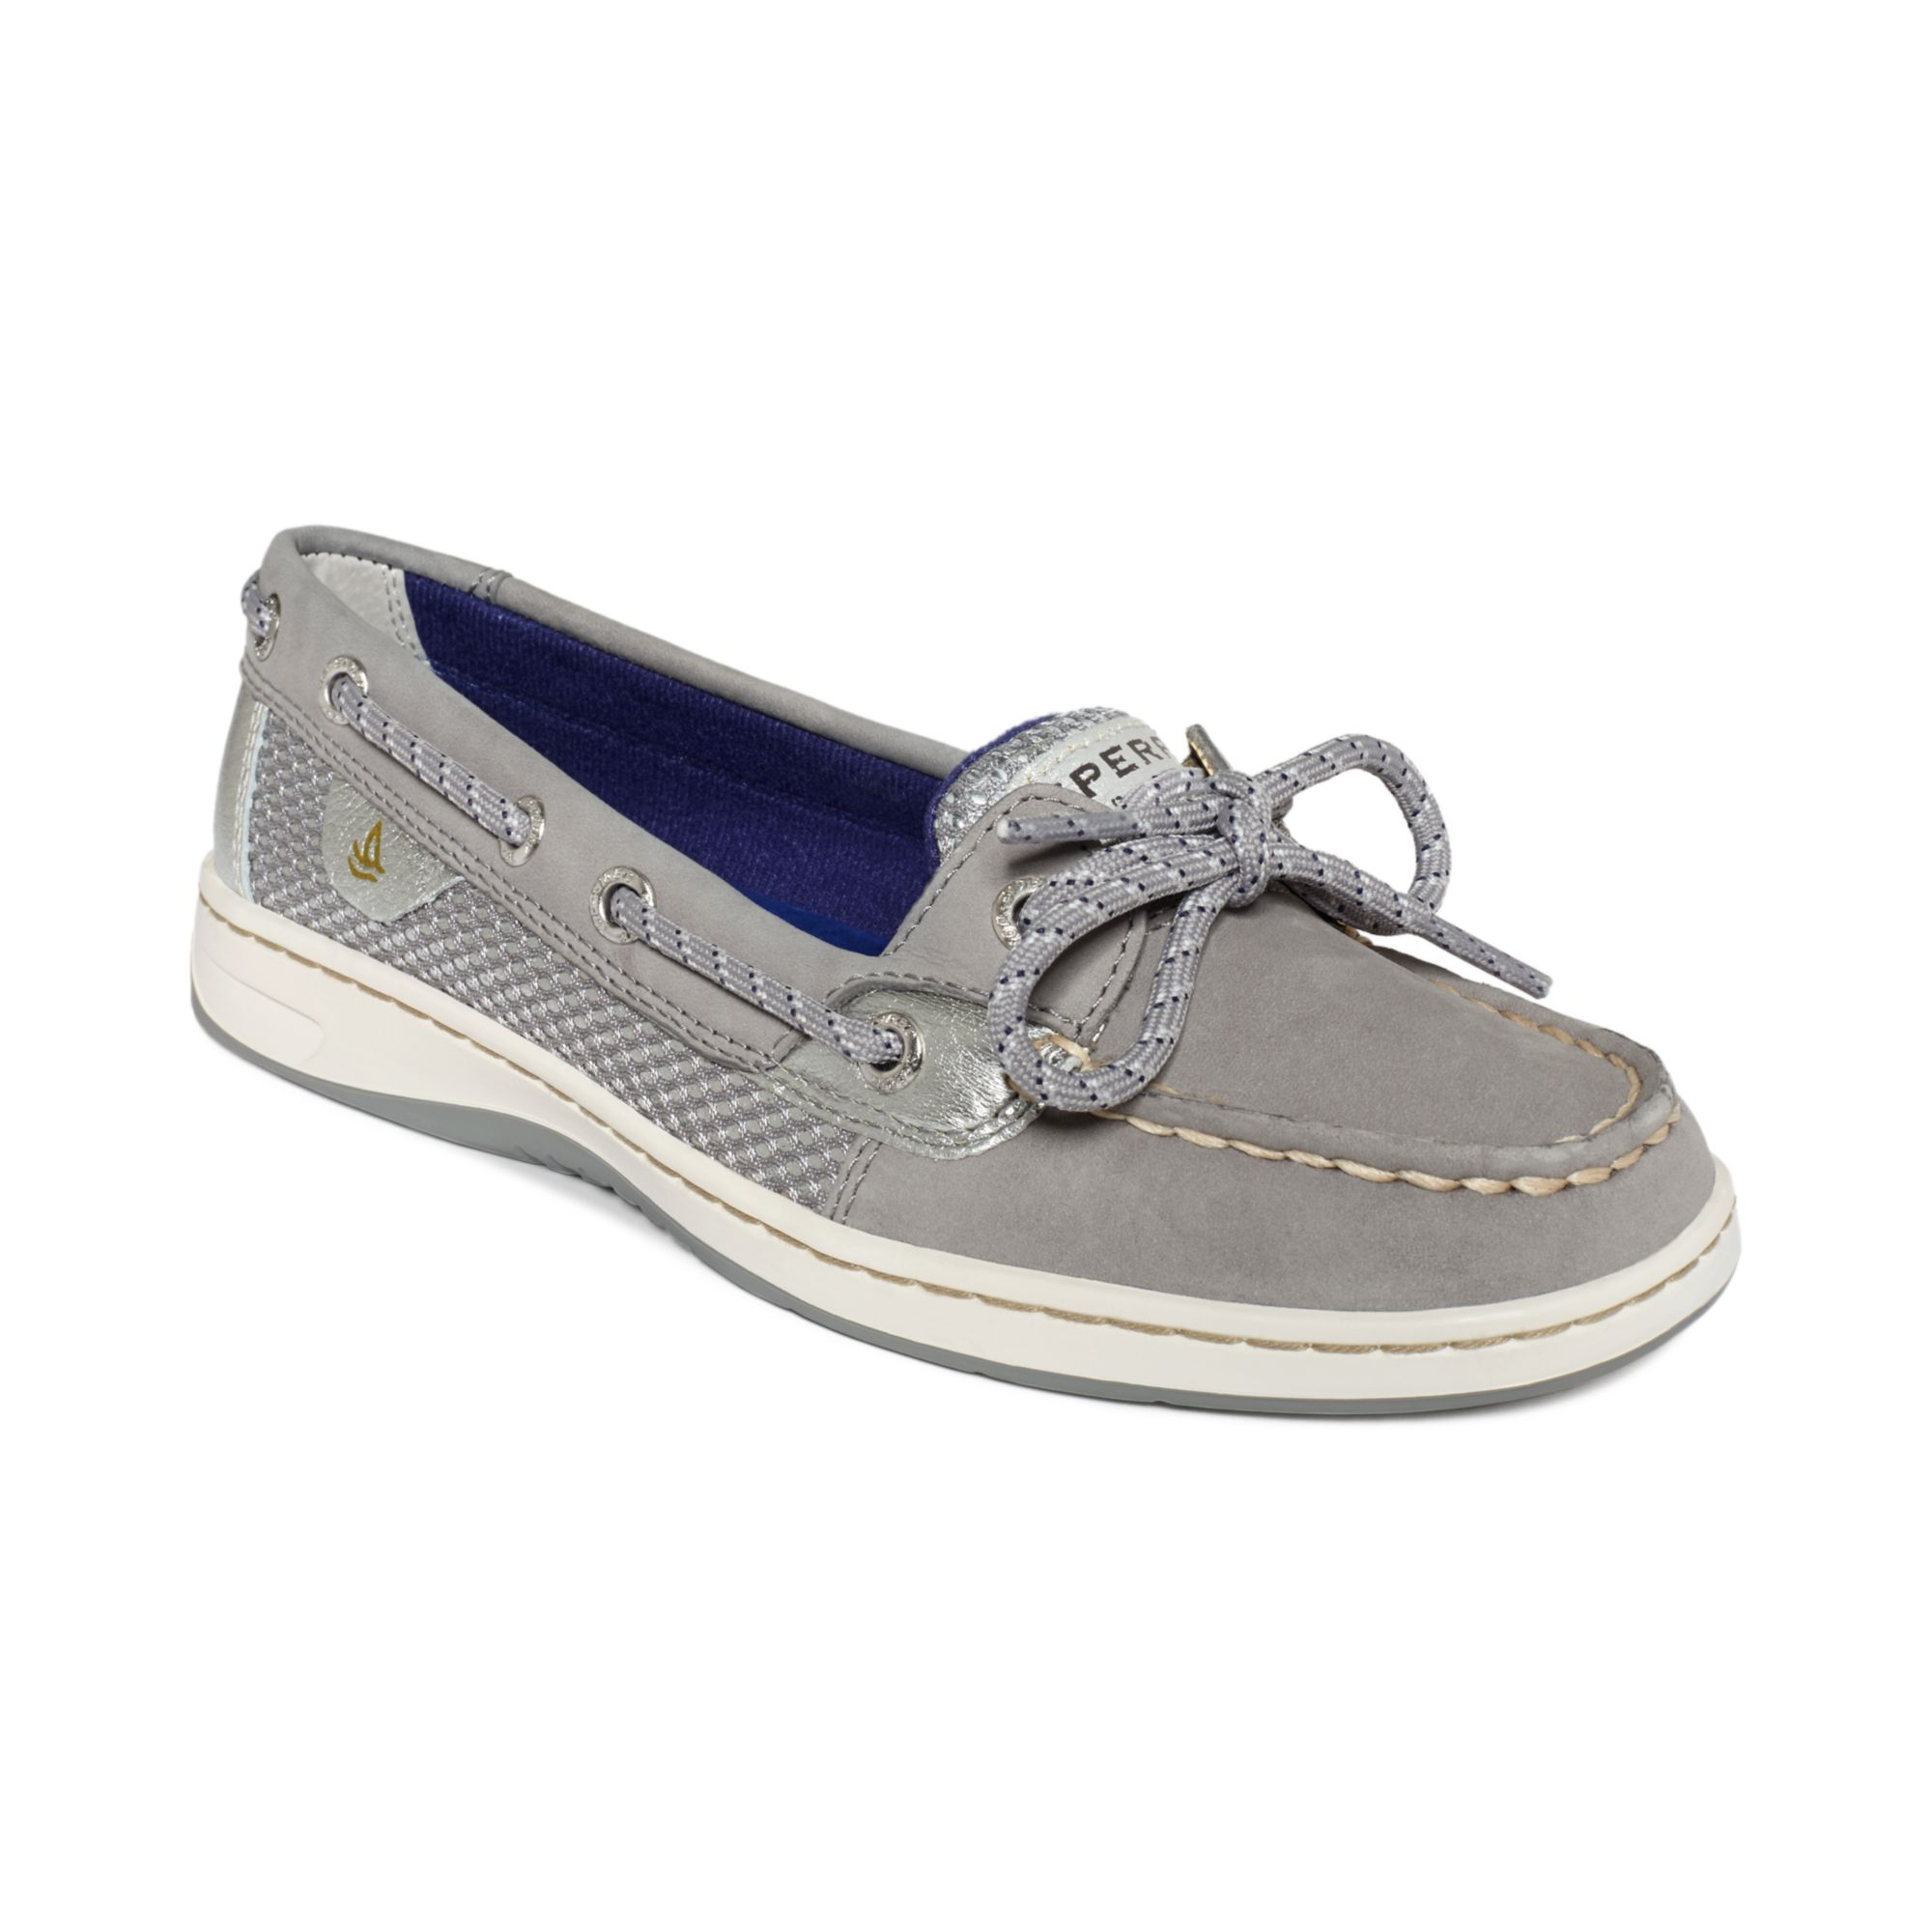 sperry top sider gray